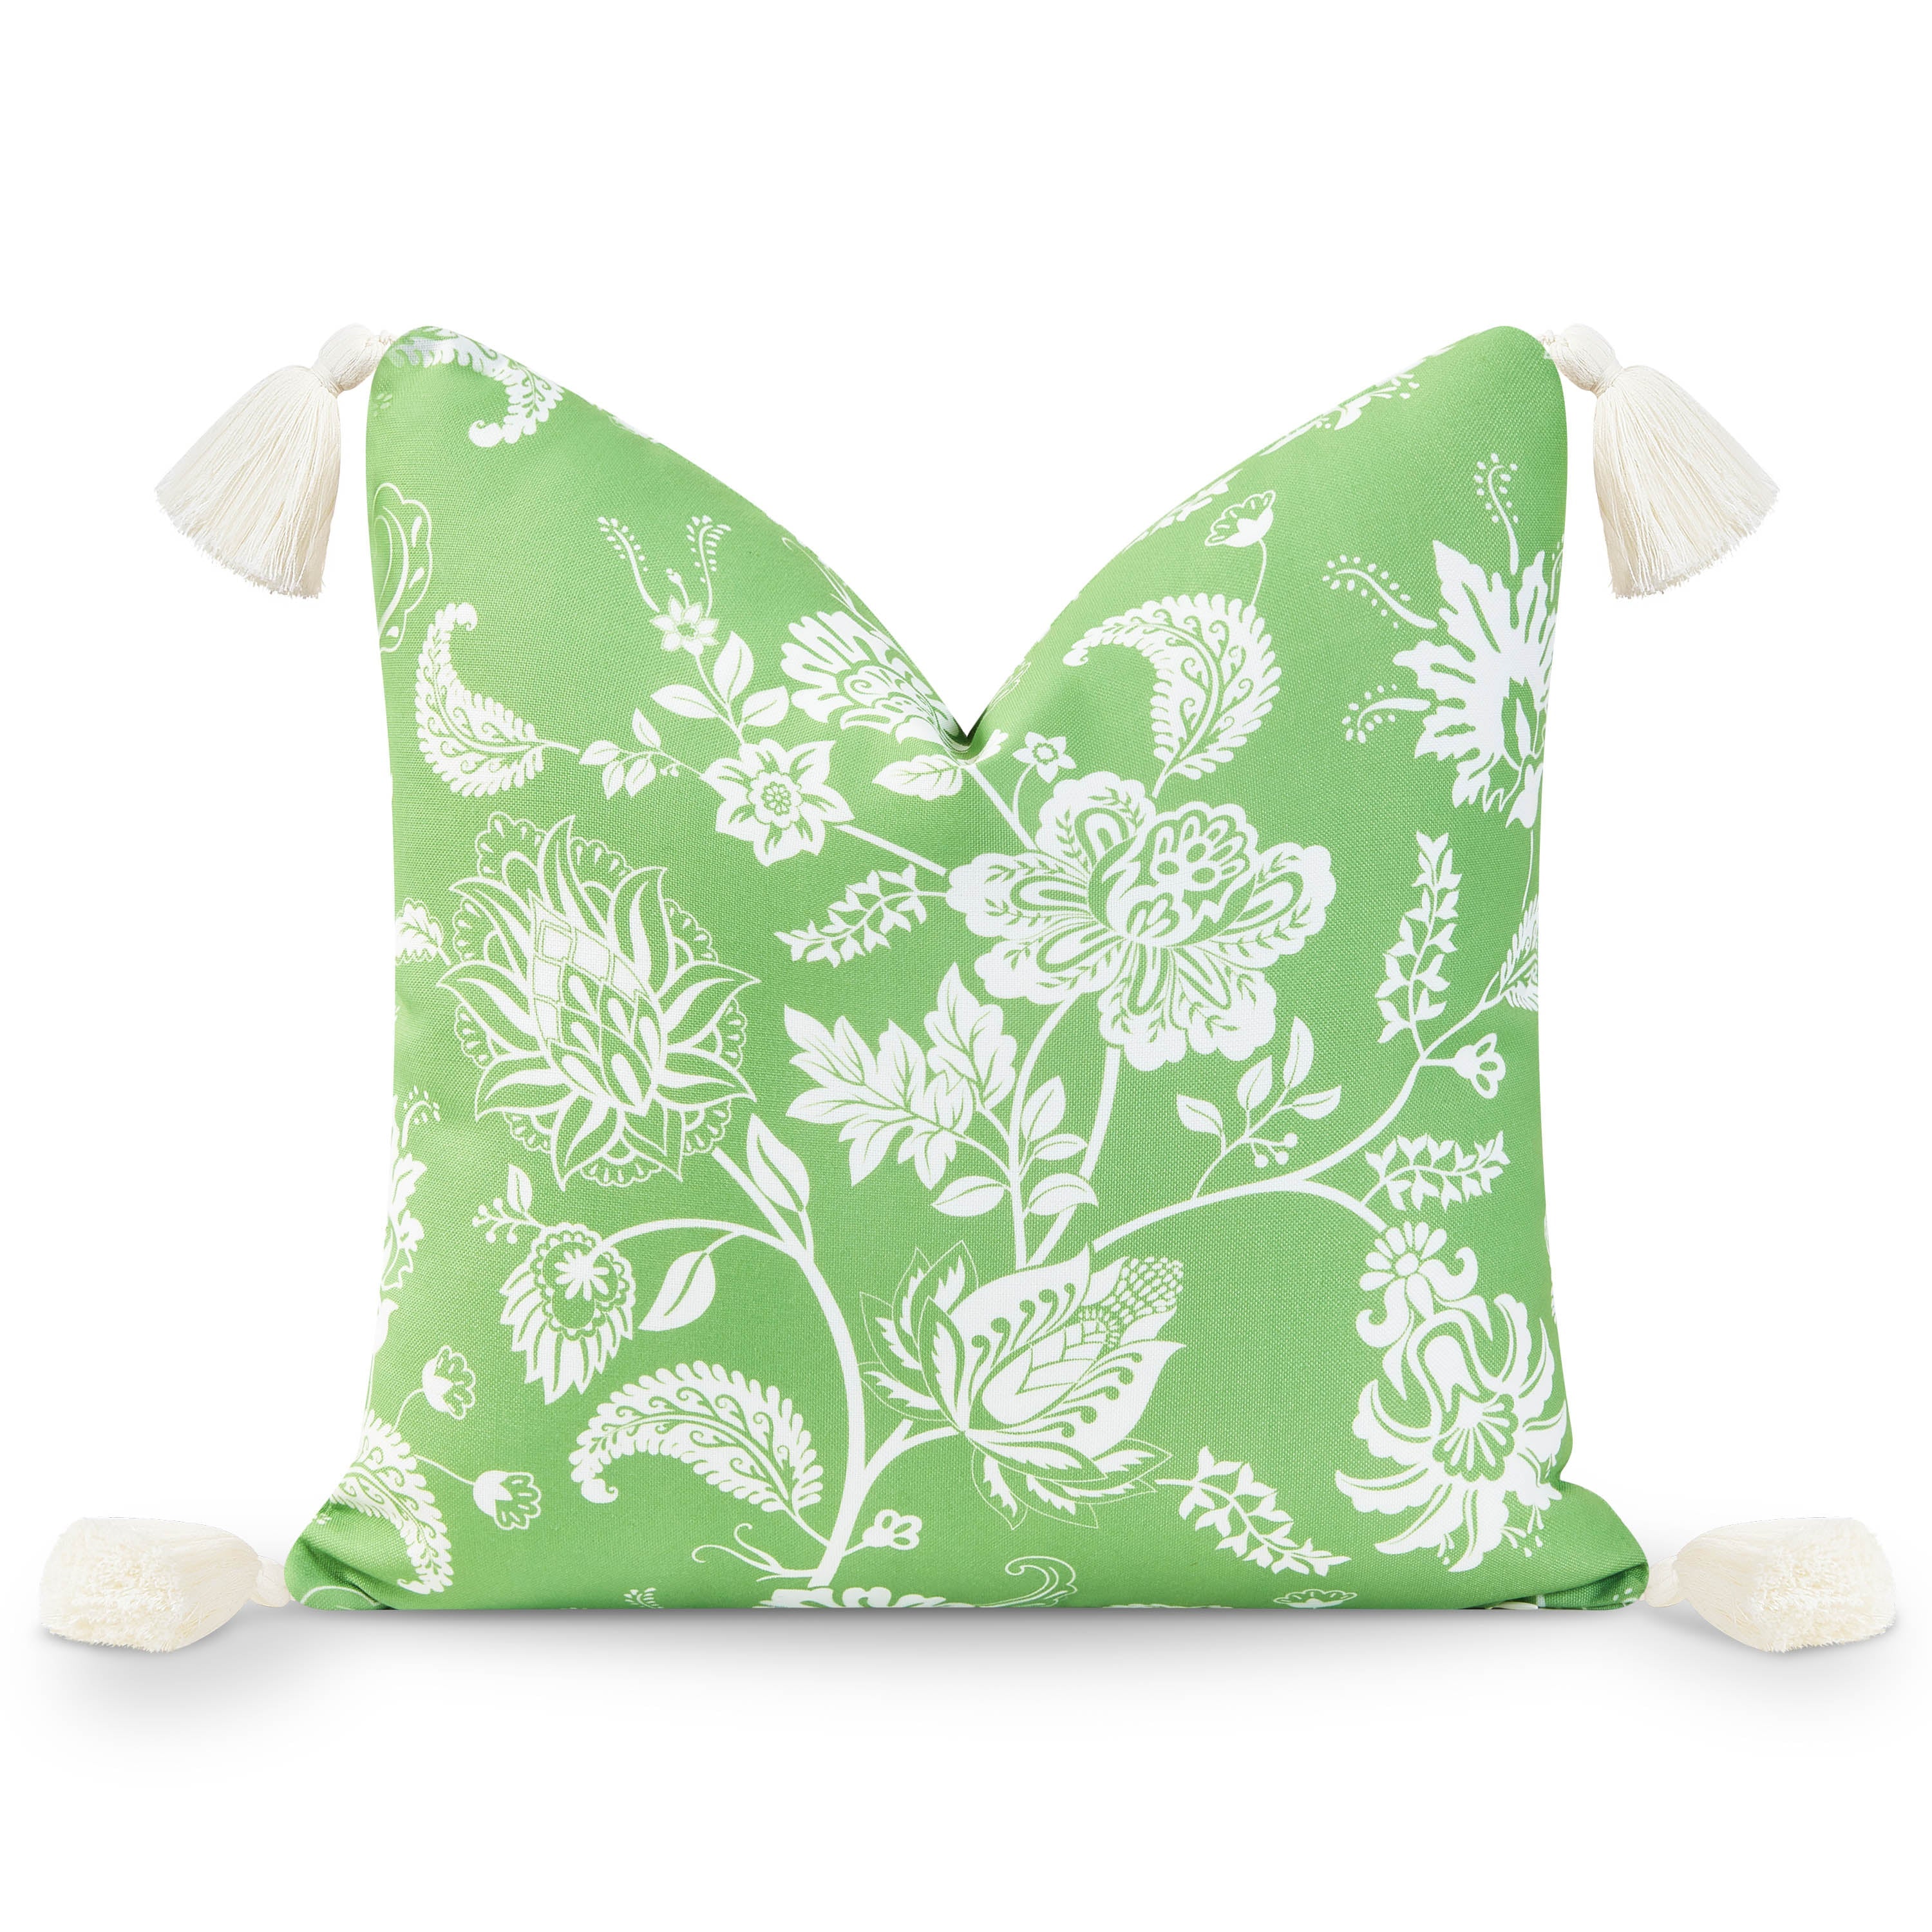 Coastal Indoor Outdoor Throw Pillow Cover, Floral Tassel, Pale Green, 18"x18"